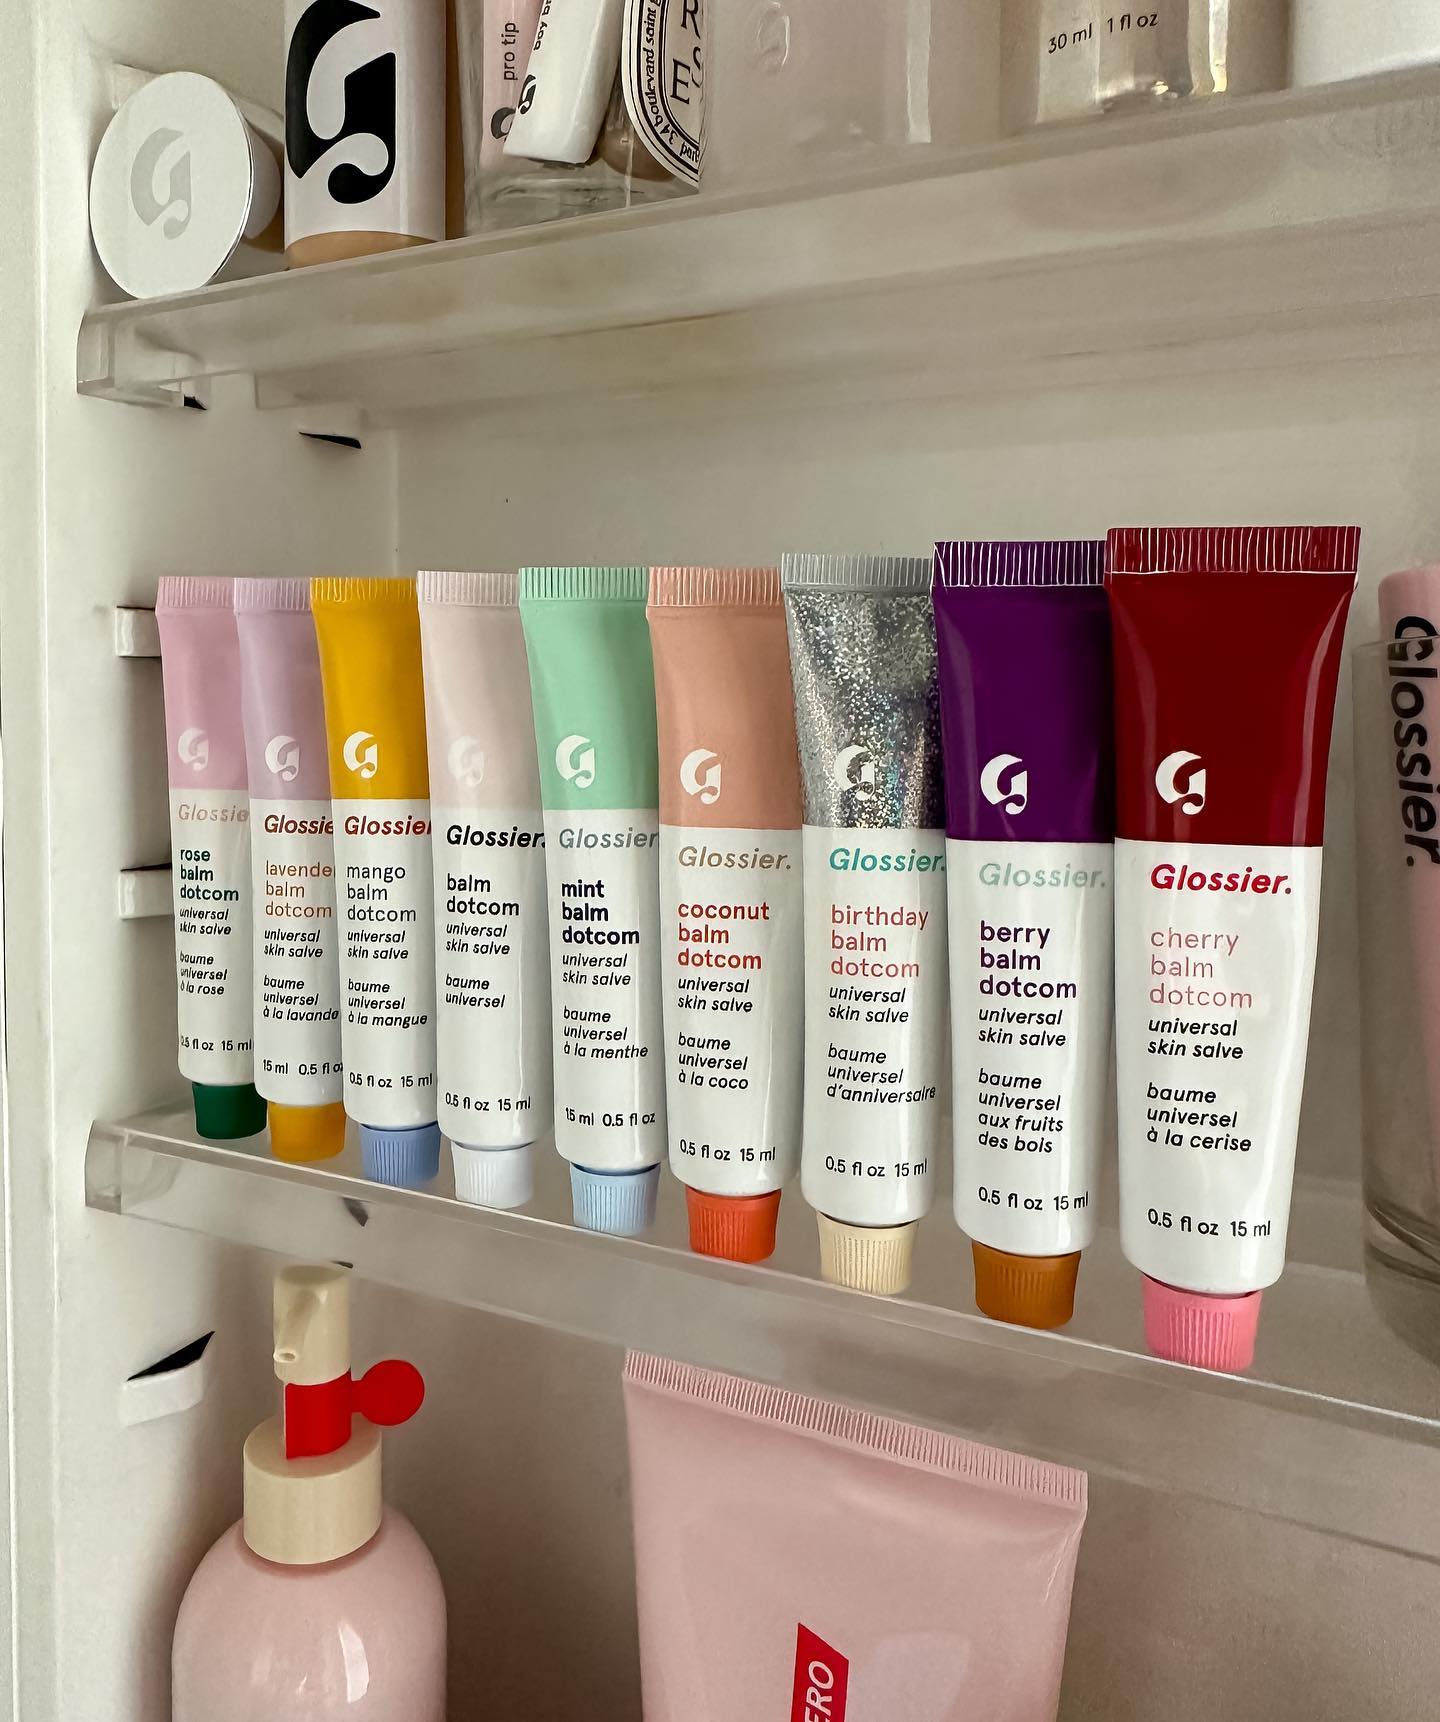 Glossier lip products are set in a line within a bathroom vanity cabinet.